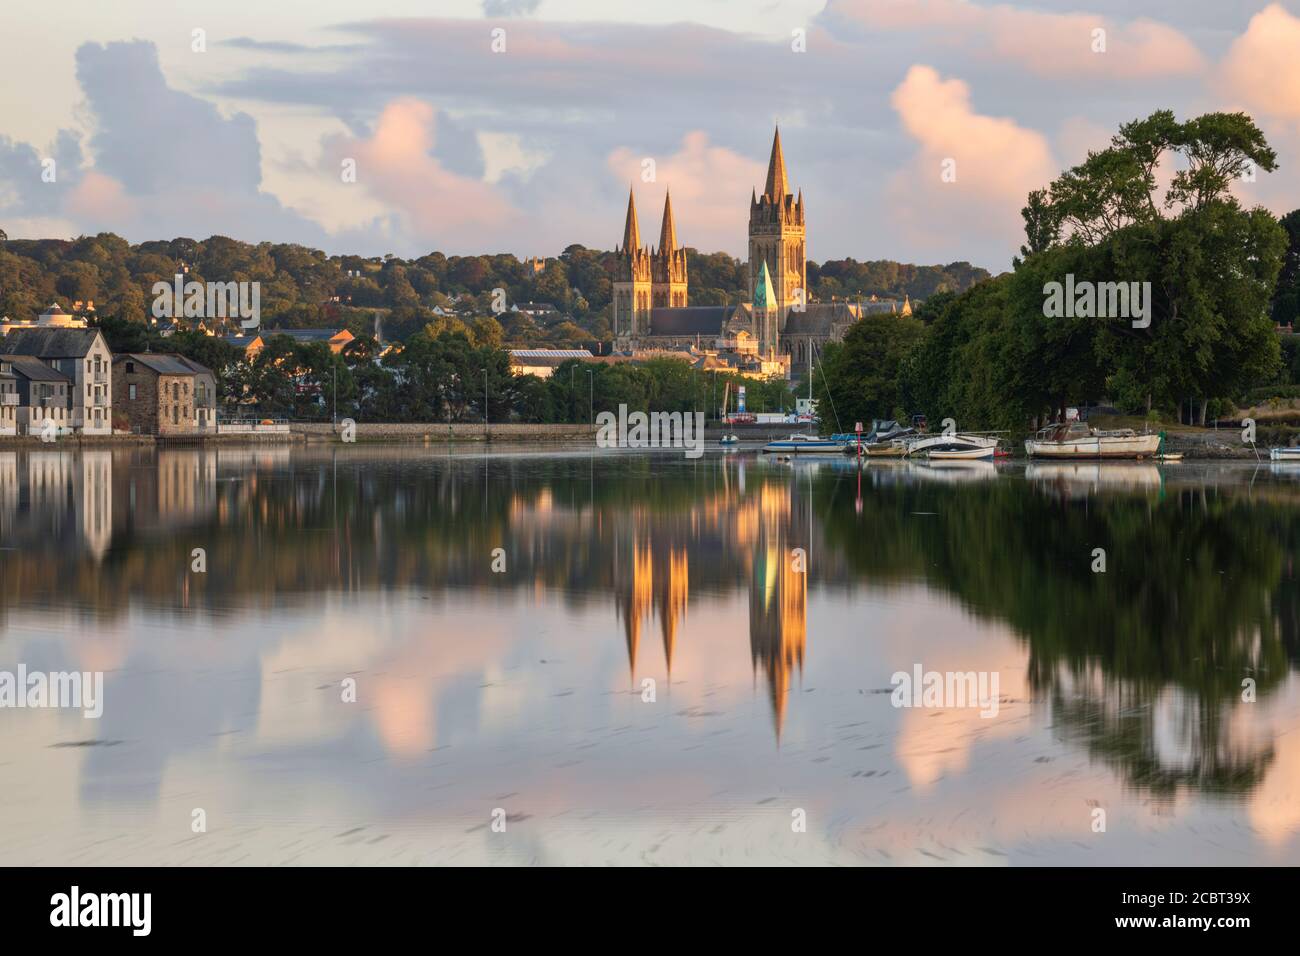 Truro Cathedral reflected in Truro River.  The image captured from Boscawen Park on a morning in early August. Stock Photo